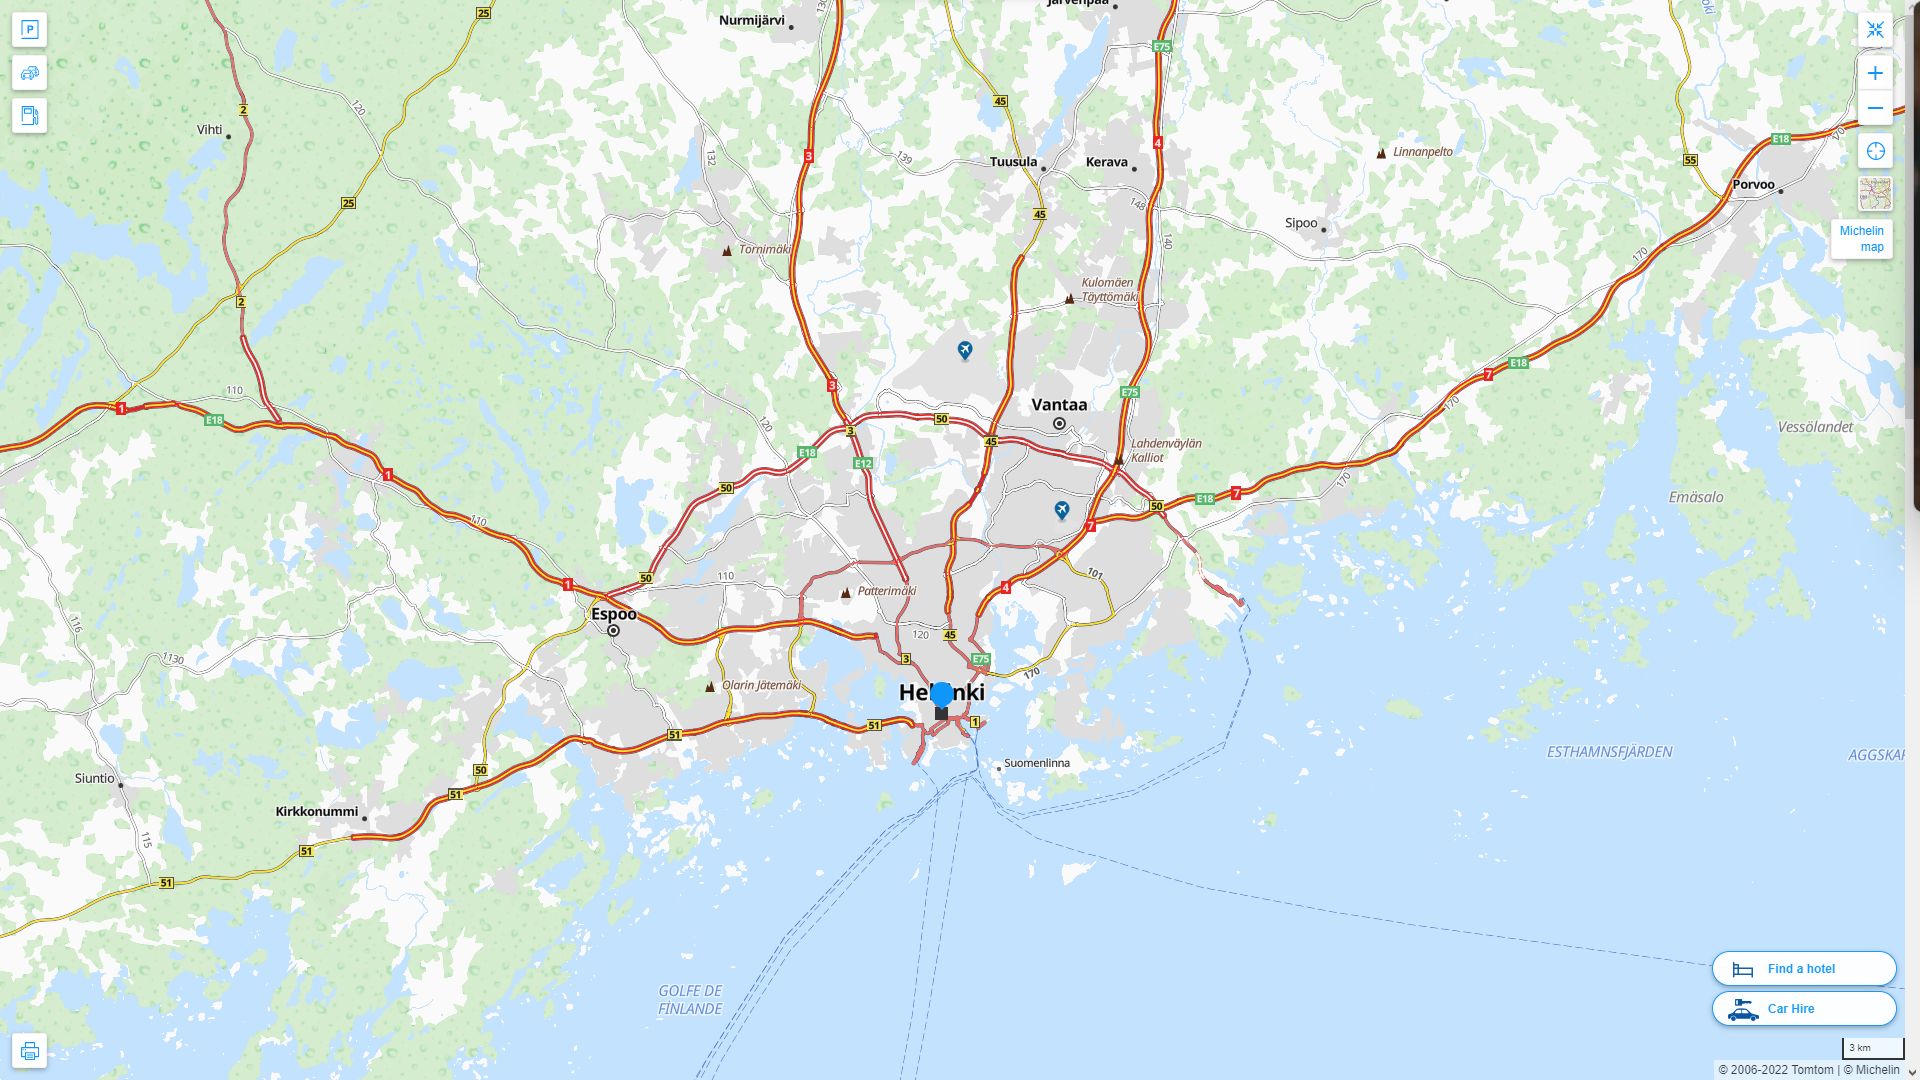 Helsinki Highway and Road Map